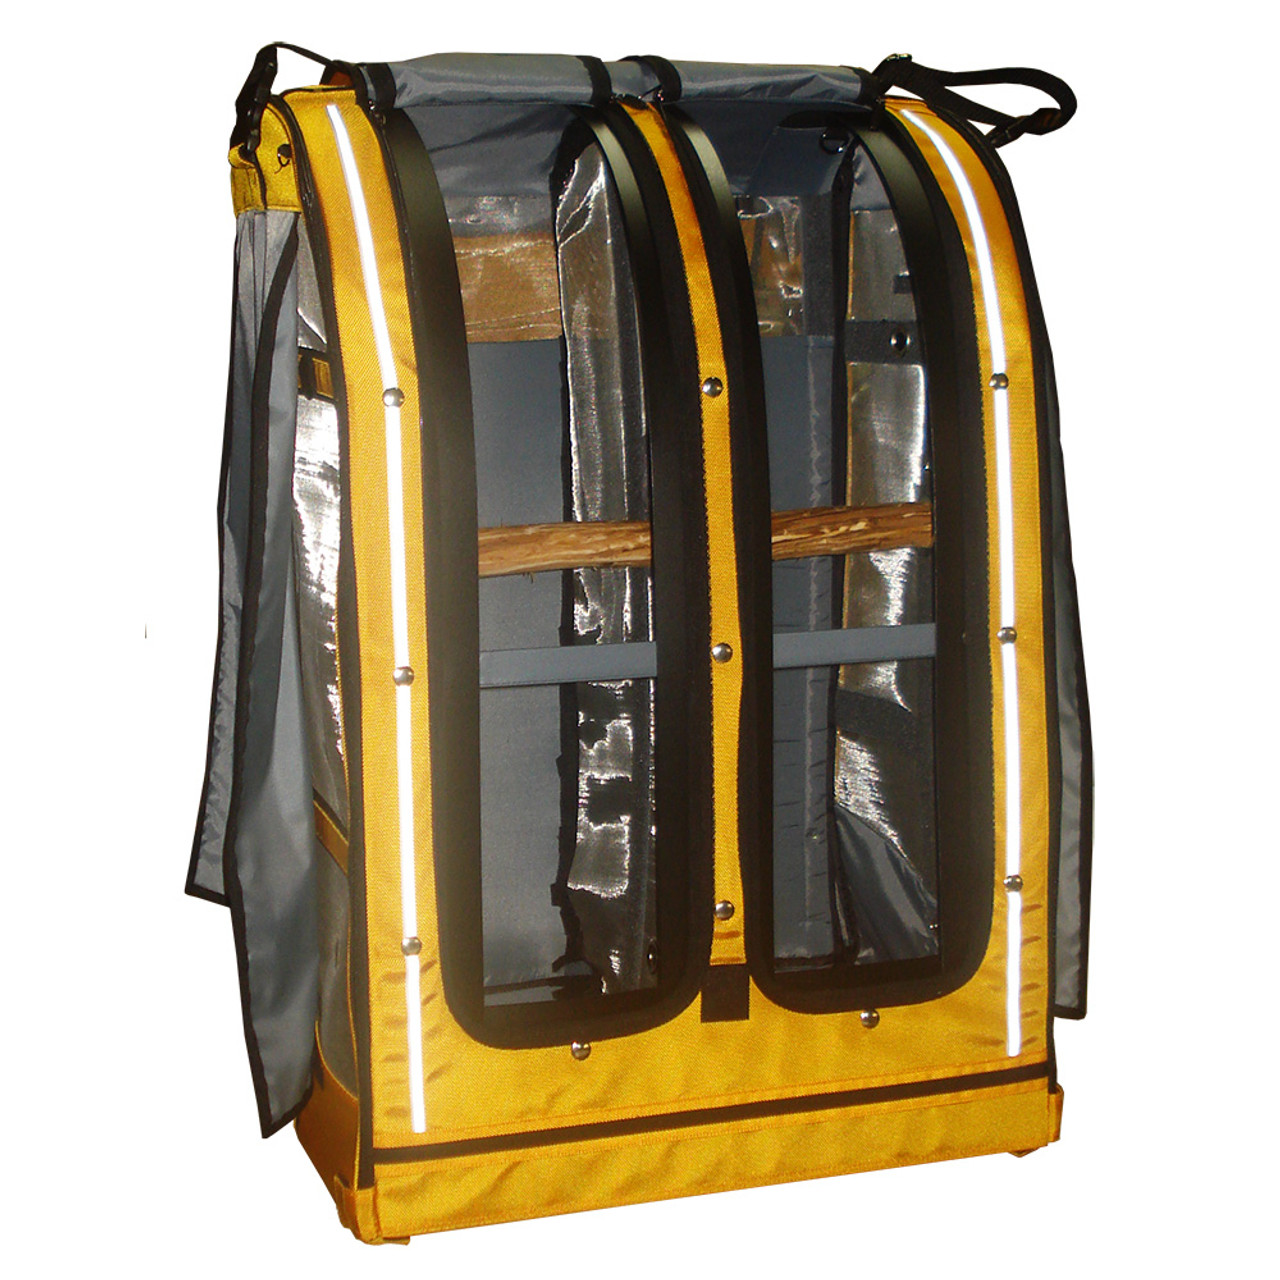 Emergency Escape Bird Carrier for two Blue & Gold Macaws